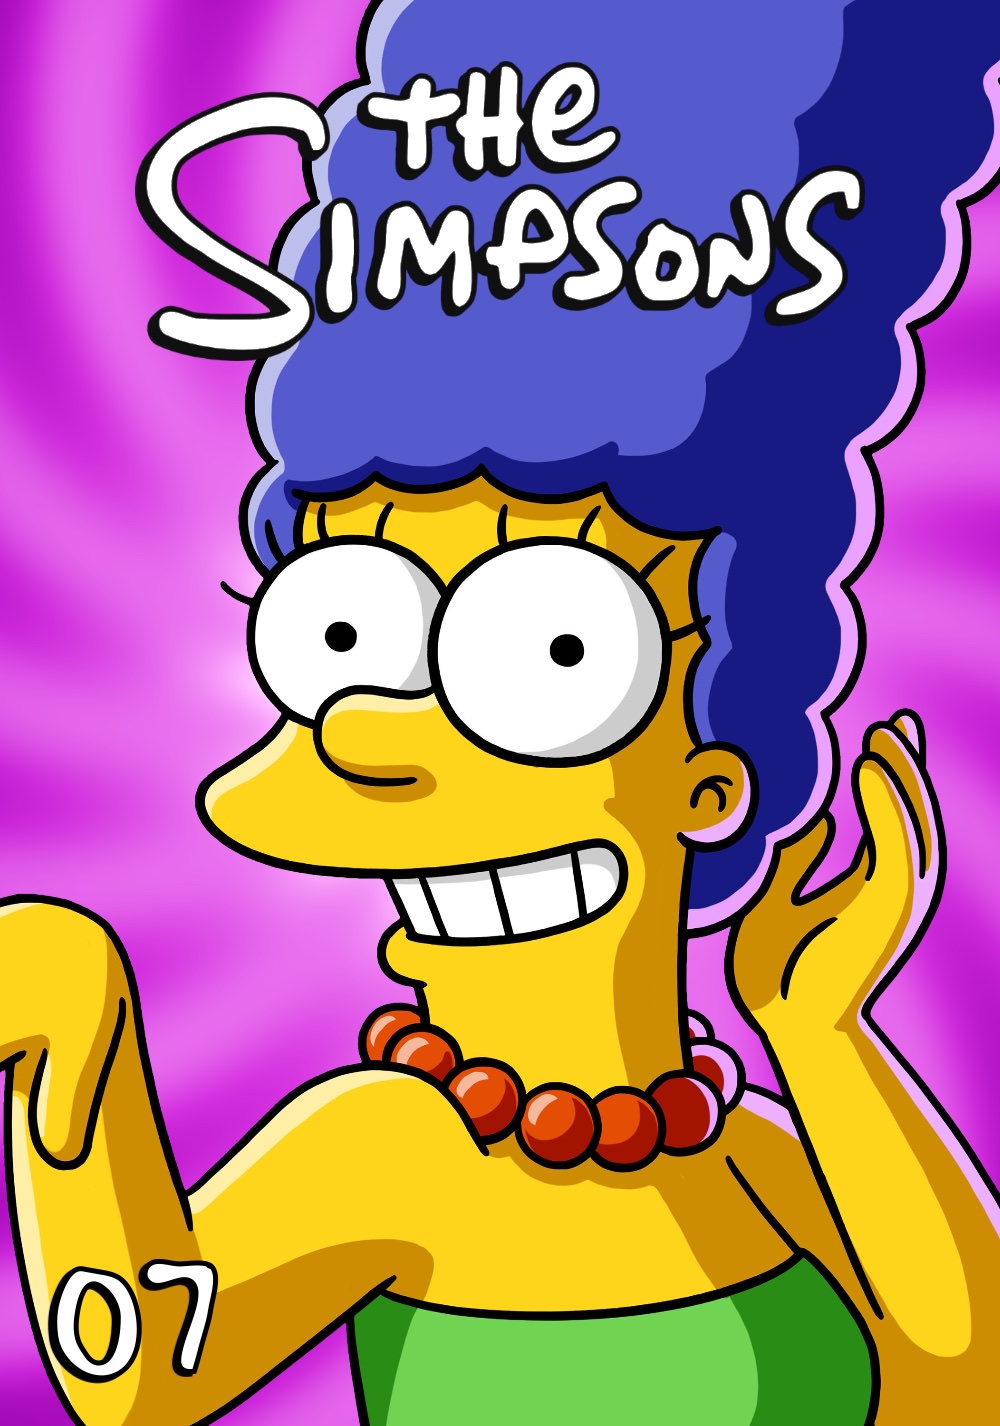 The Simpsons *Ultimate Collection* S07 (1995) BDRip 1080p HEVC 10-bit EAC3-5.1 MultiSub Retail